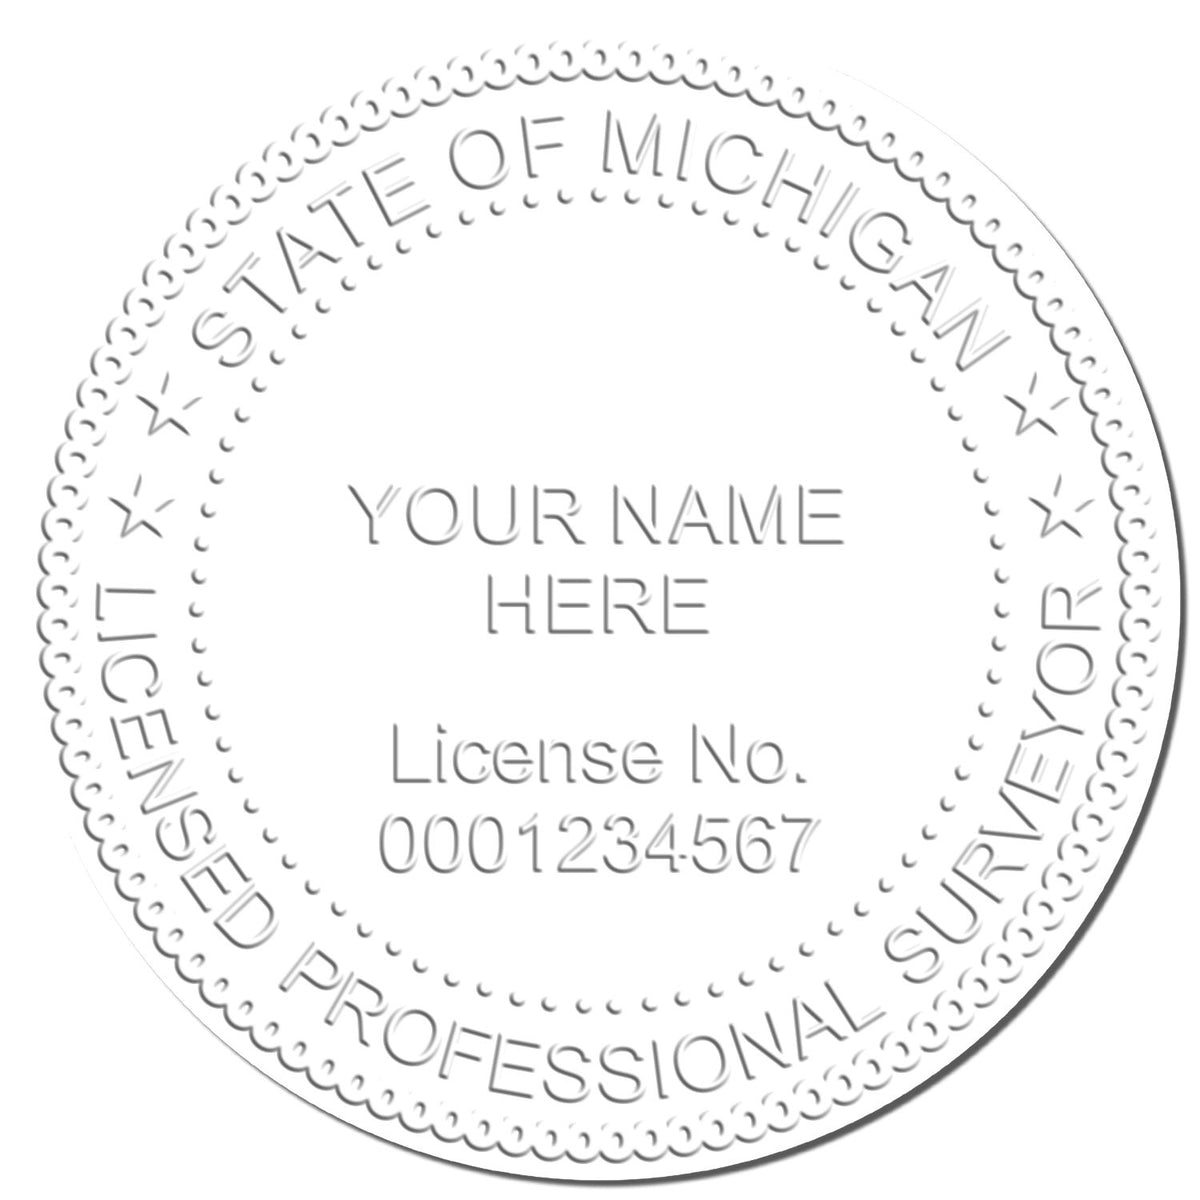 This paper is stamped with a sample imprint of the Hybrid Michigan Land Surveyor Seal, signifying its quality and reliability.